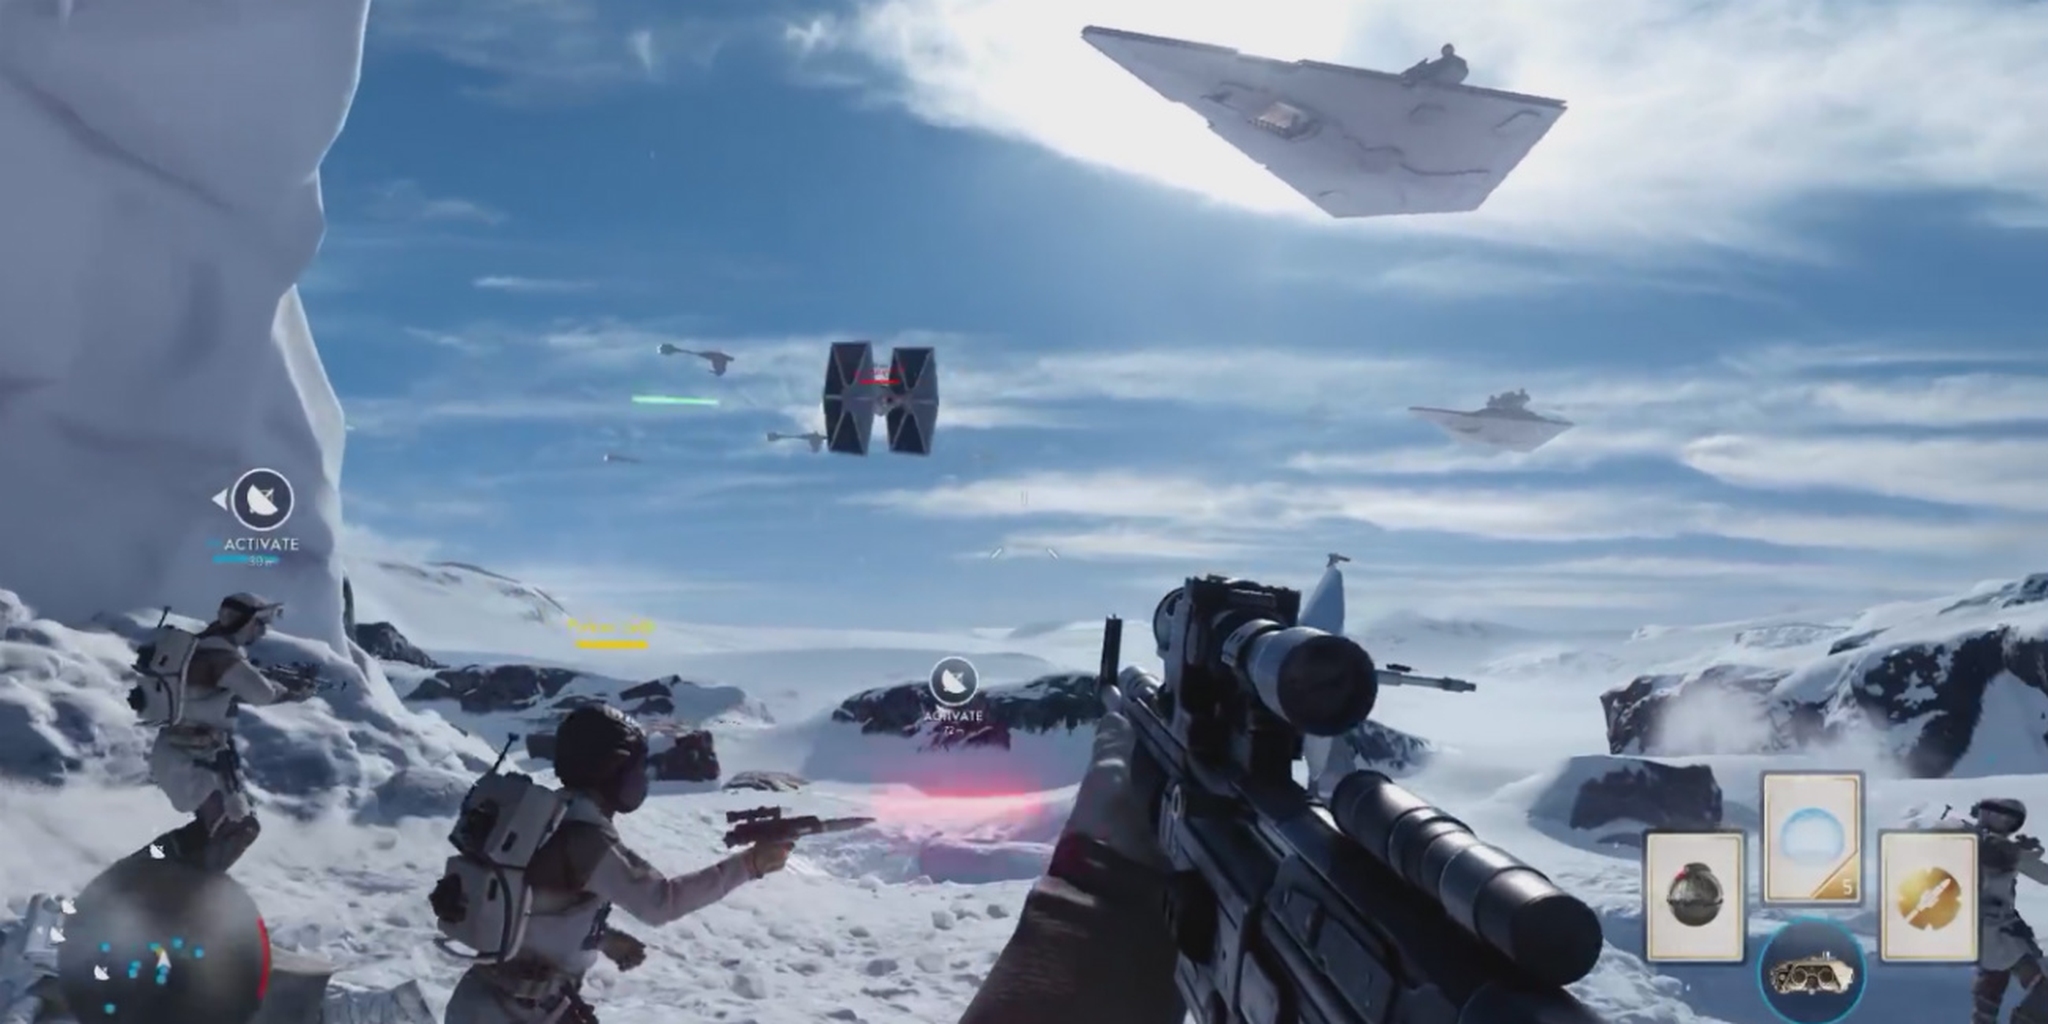 Star Wars Battlefront nails the look, sound, and feel of the movies